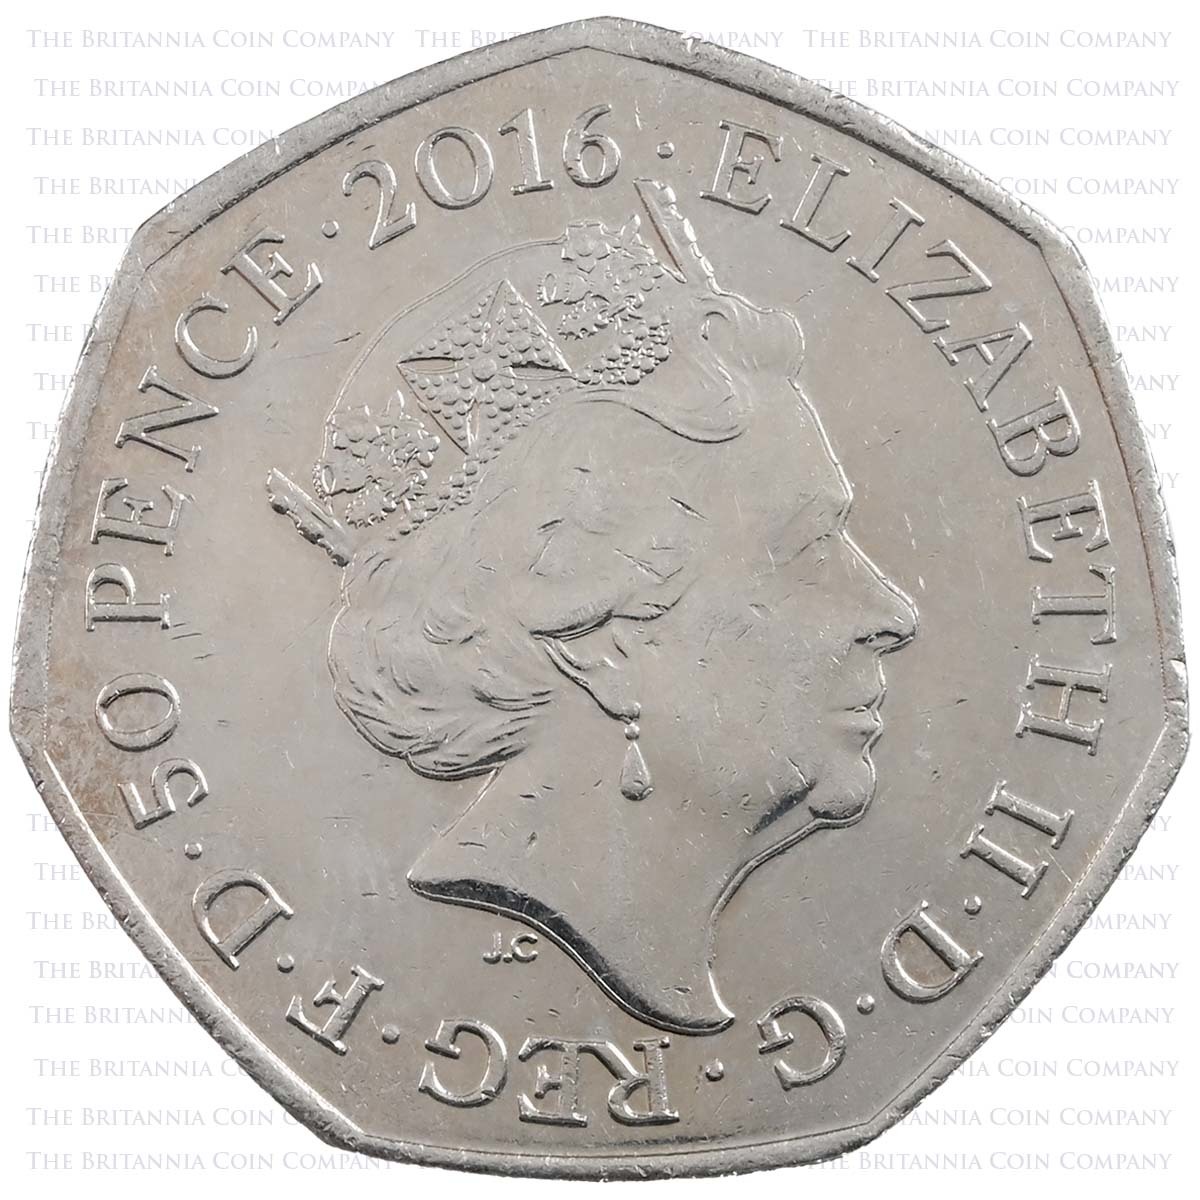 2016 Beatrix Potter 150th Anniversary Circulated Fifty Pence Coin Obverse